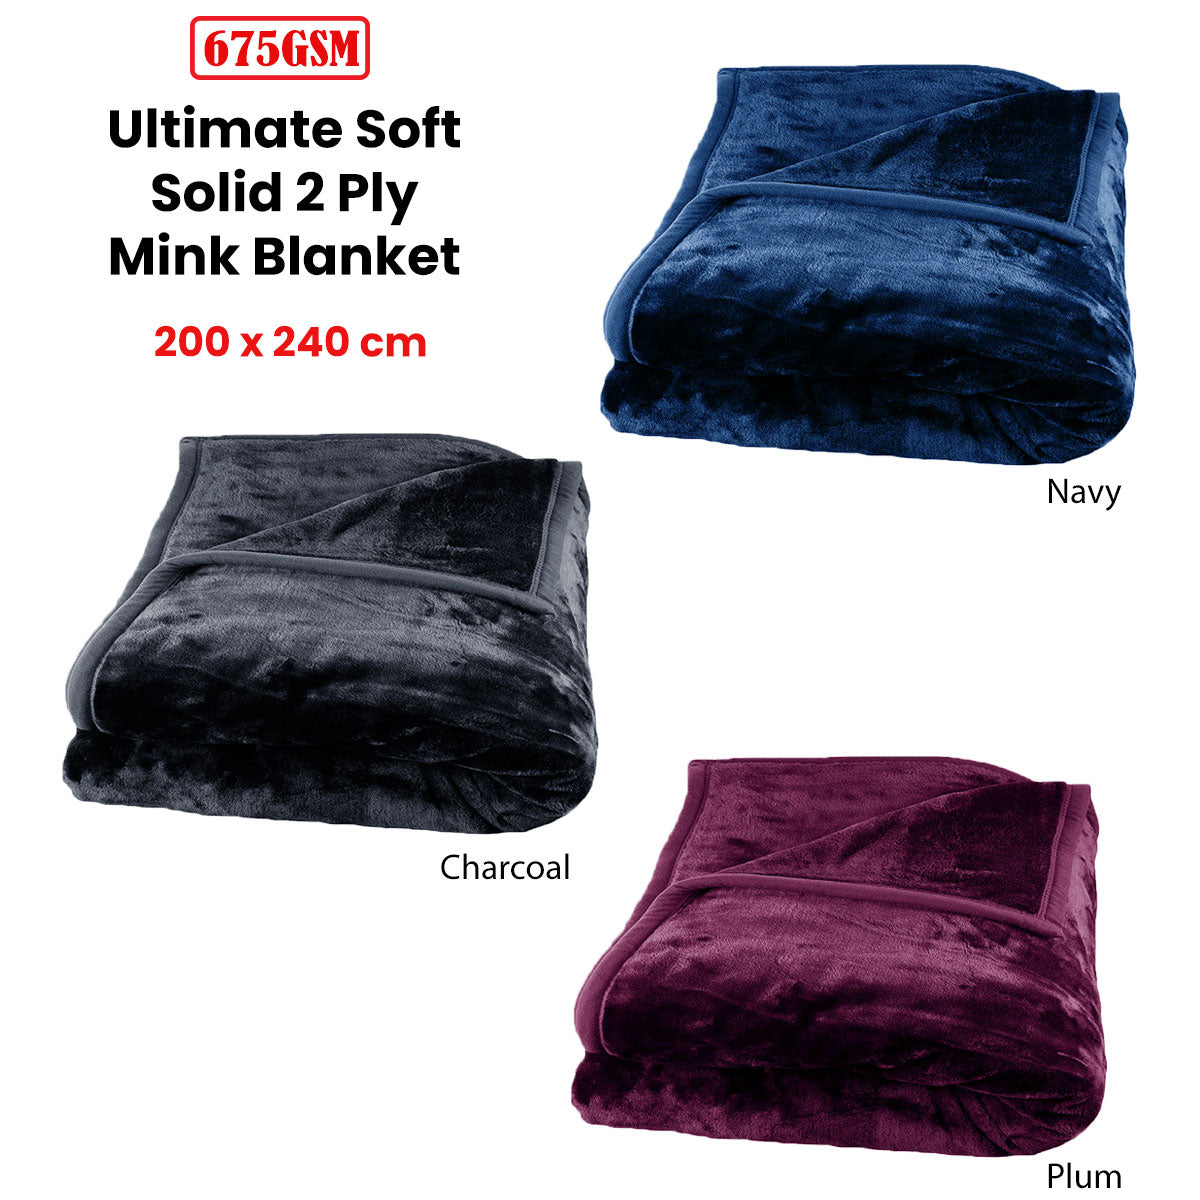 675gsm 2 Ply Solid Faux Mink Blanket Queen 200x240 cm Charcoal - BM House & Garden